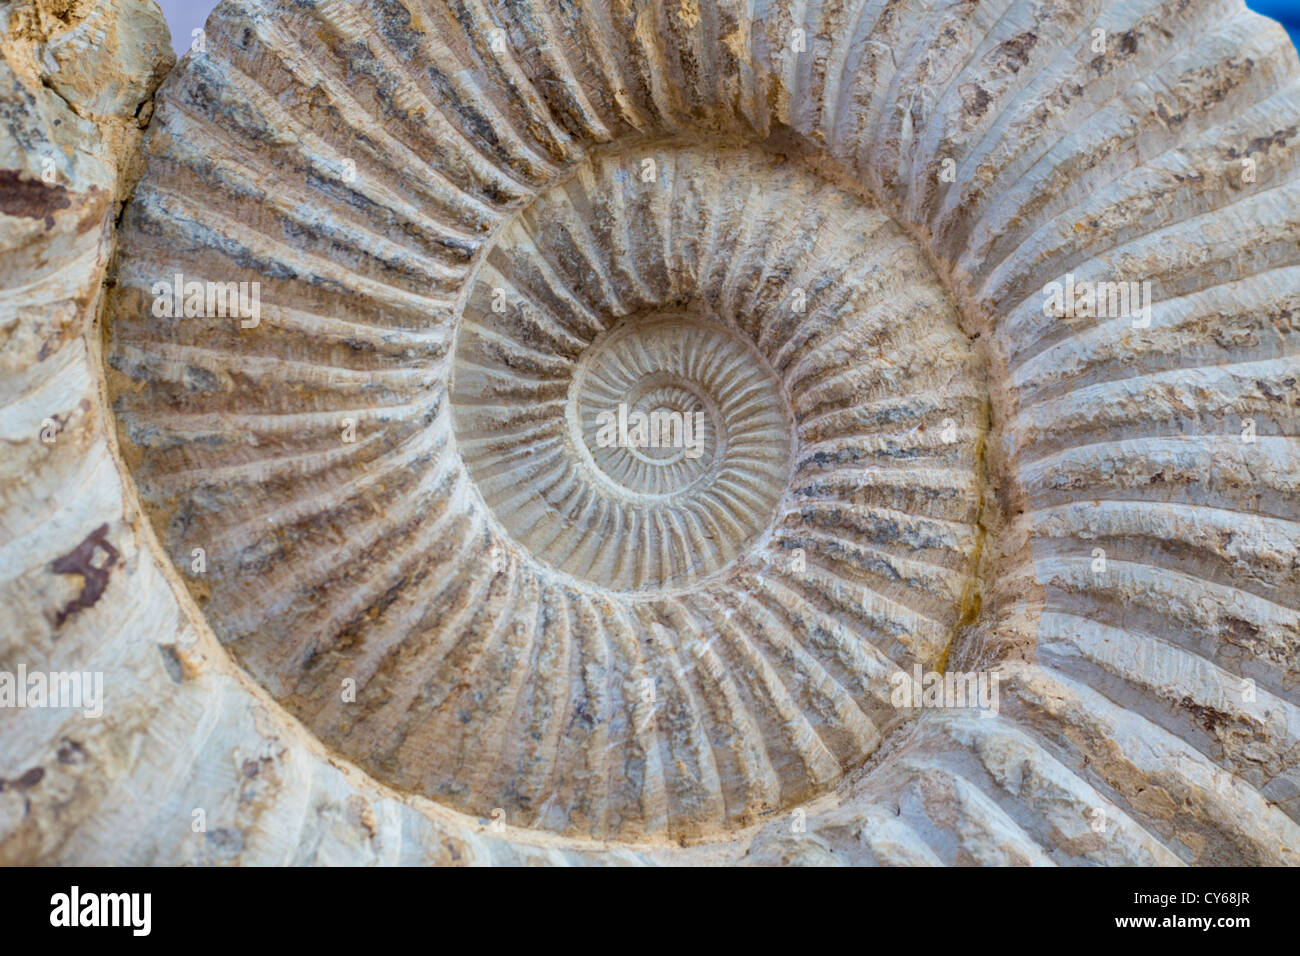 Ancient big snail spiral fossil detail Stock Photo